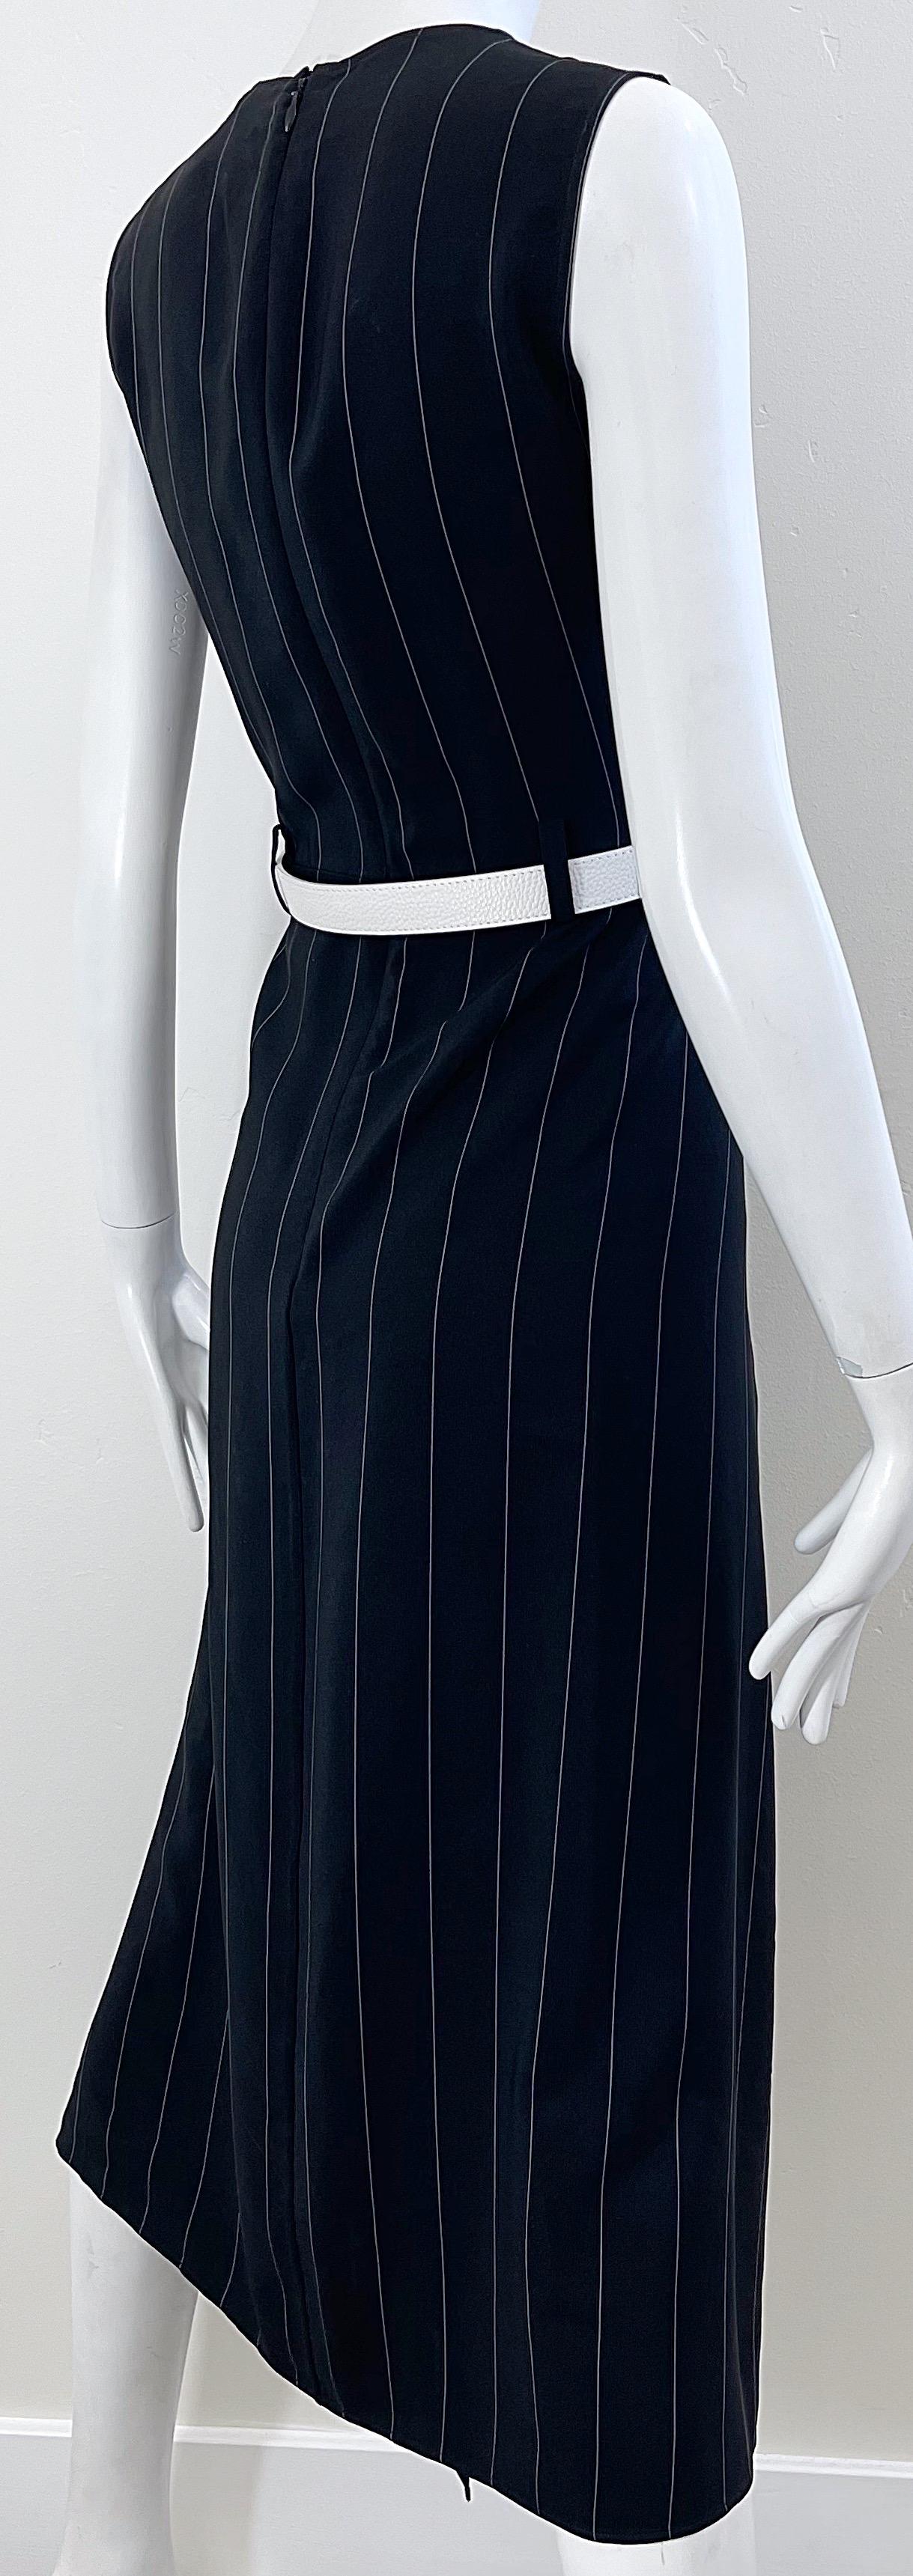 2000s Thierry Mugler Black and White Size 38 / 6 Pinstripe Hi-Lo Vintage Dress For Sale 8